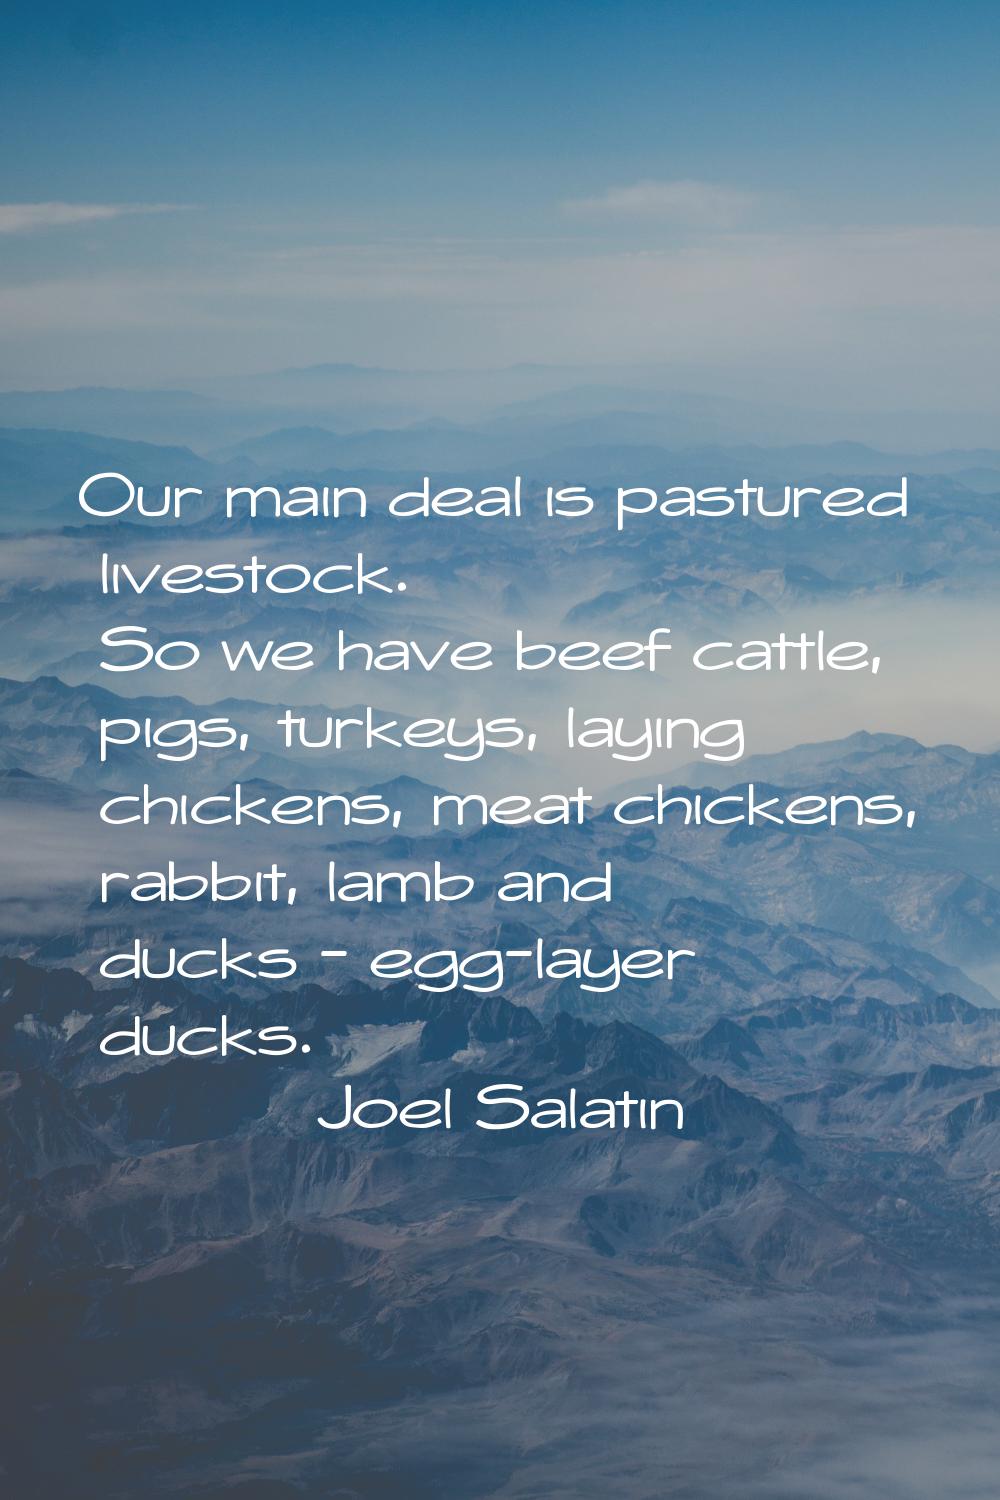 Our main deal is pastured livestock. So we have beef cattle, pigs, turkeys, laying chickens, meat c